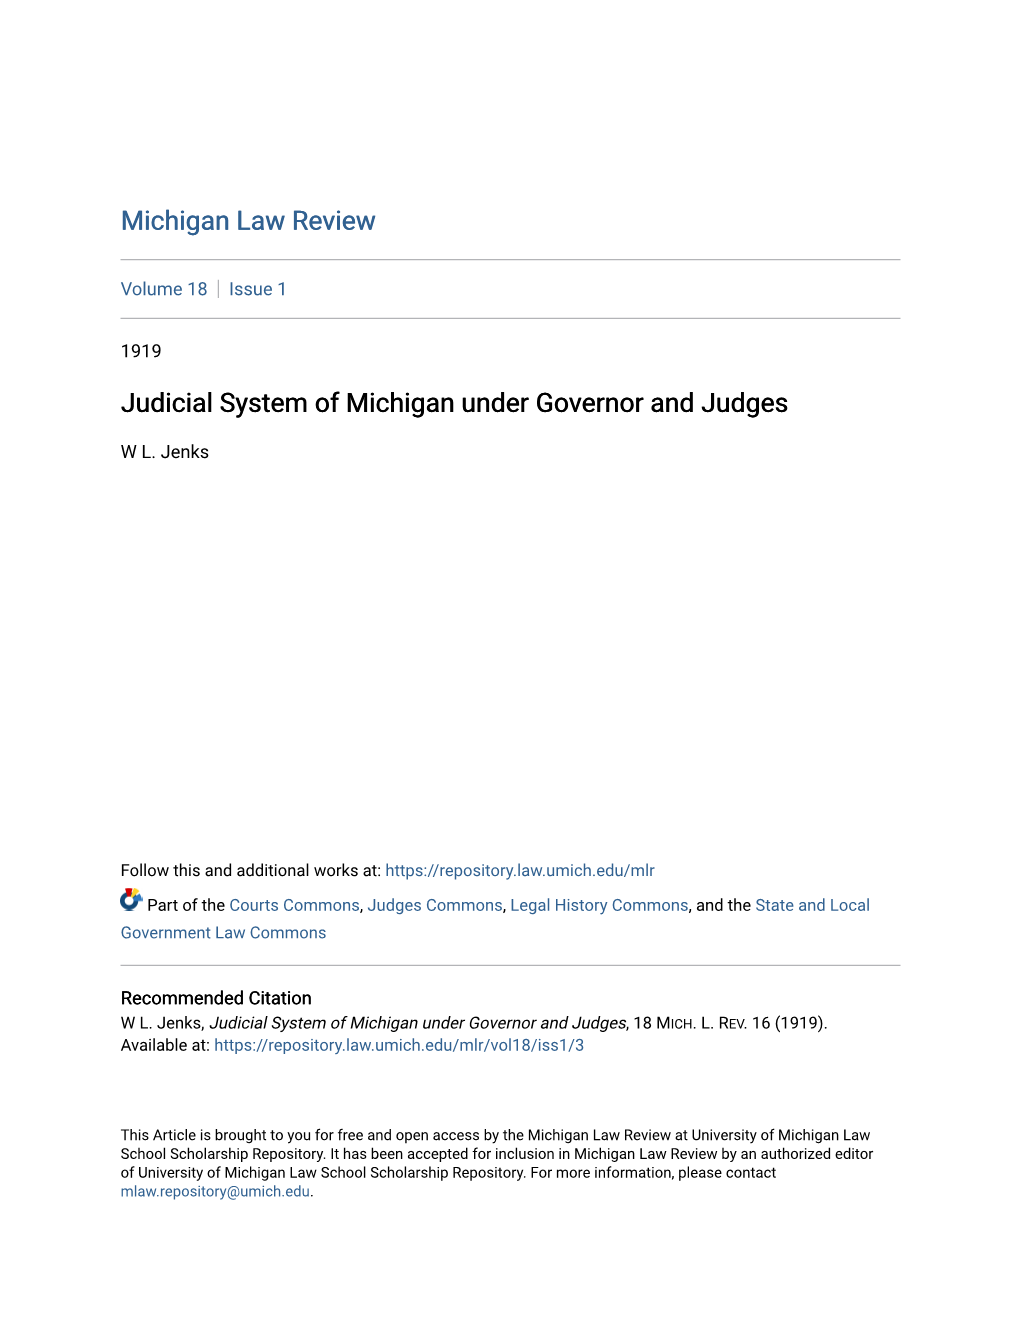 Judicial System of Michigan Under Governor and Judges